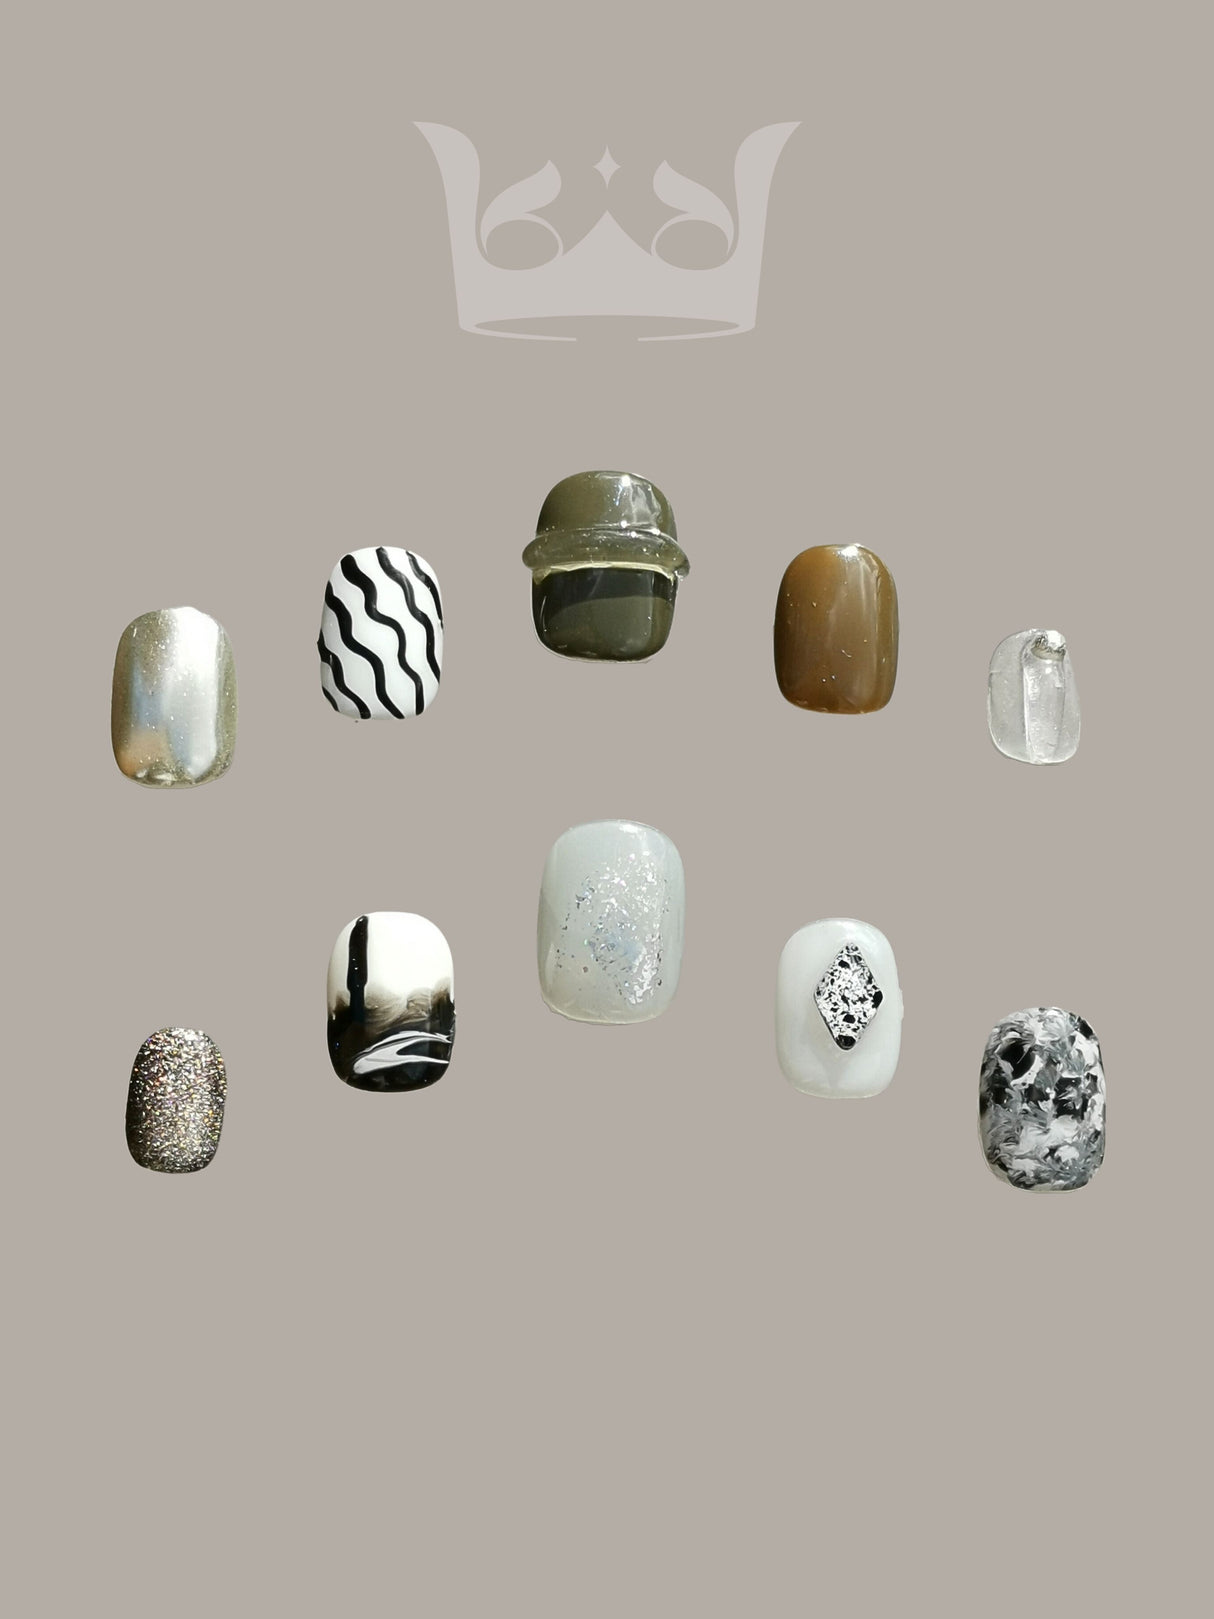 Luxury nails for fashion or aesthetic purposes with solid colors, glossy/glitter finishes, marbled designs, zebra stripes, and various patterns. Enhances appearance and self-expression.